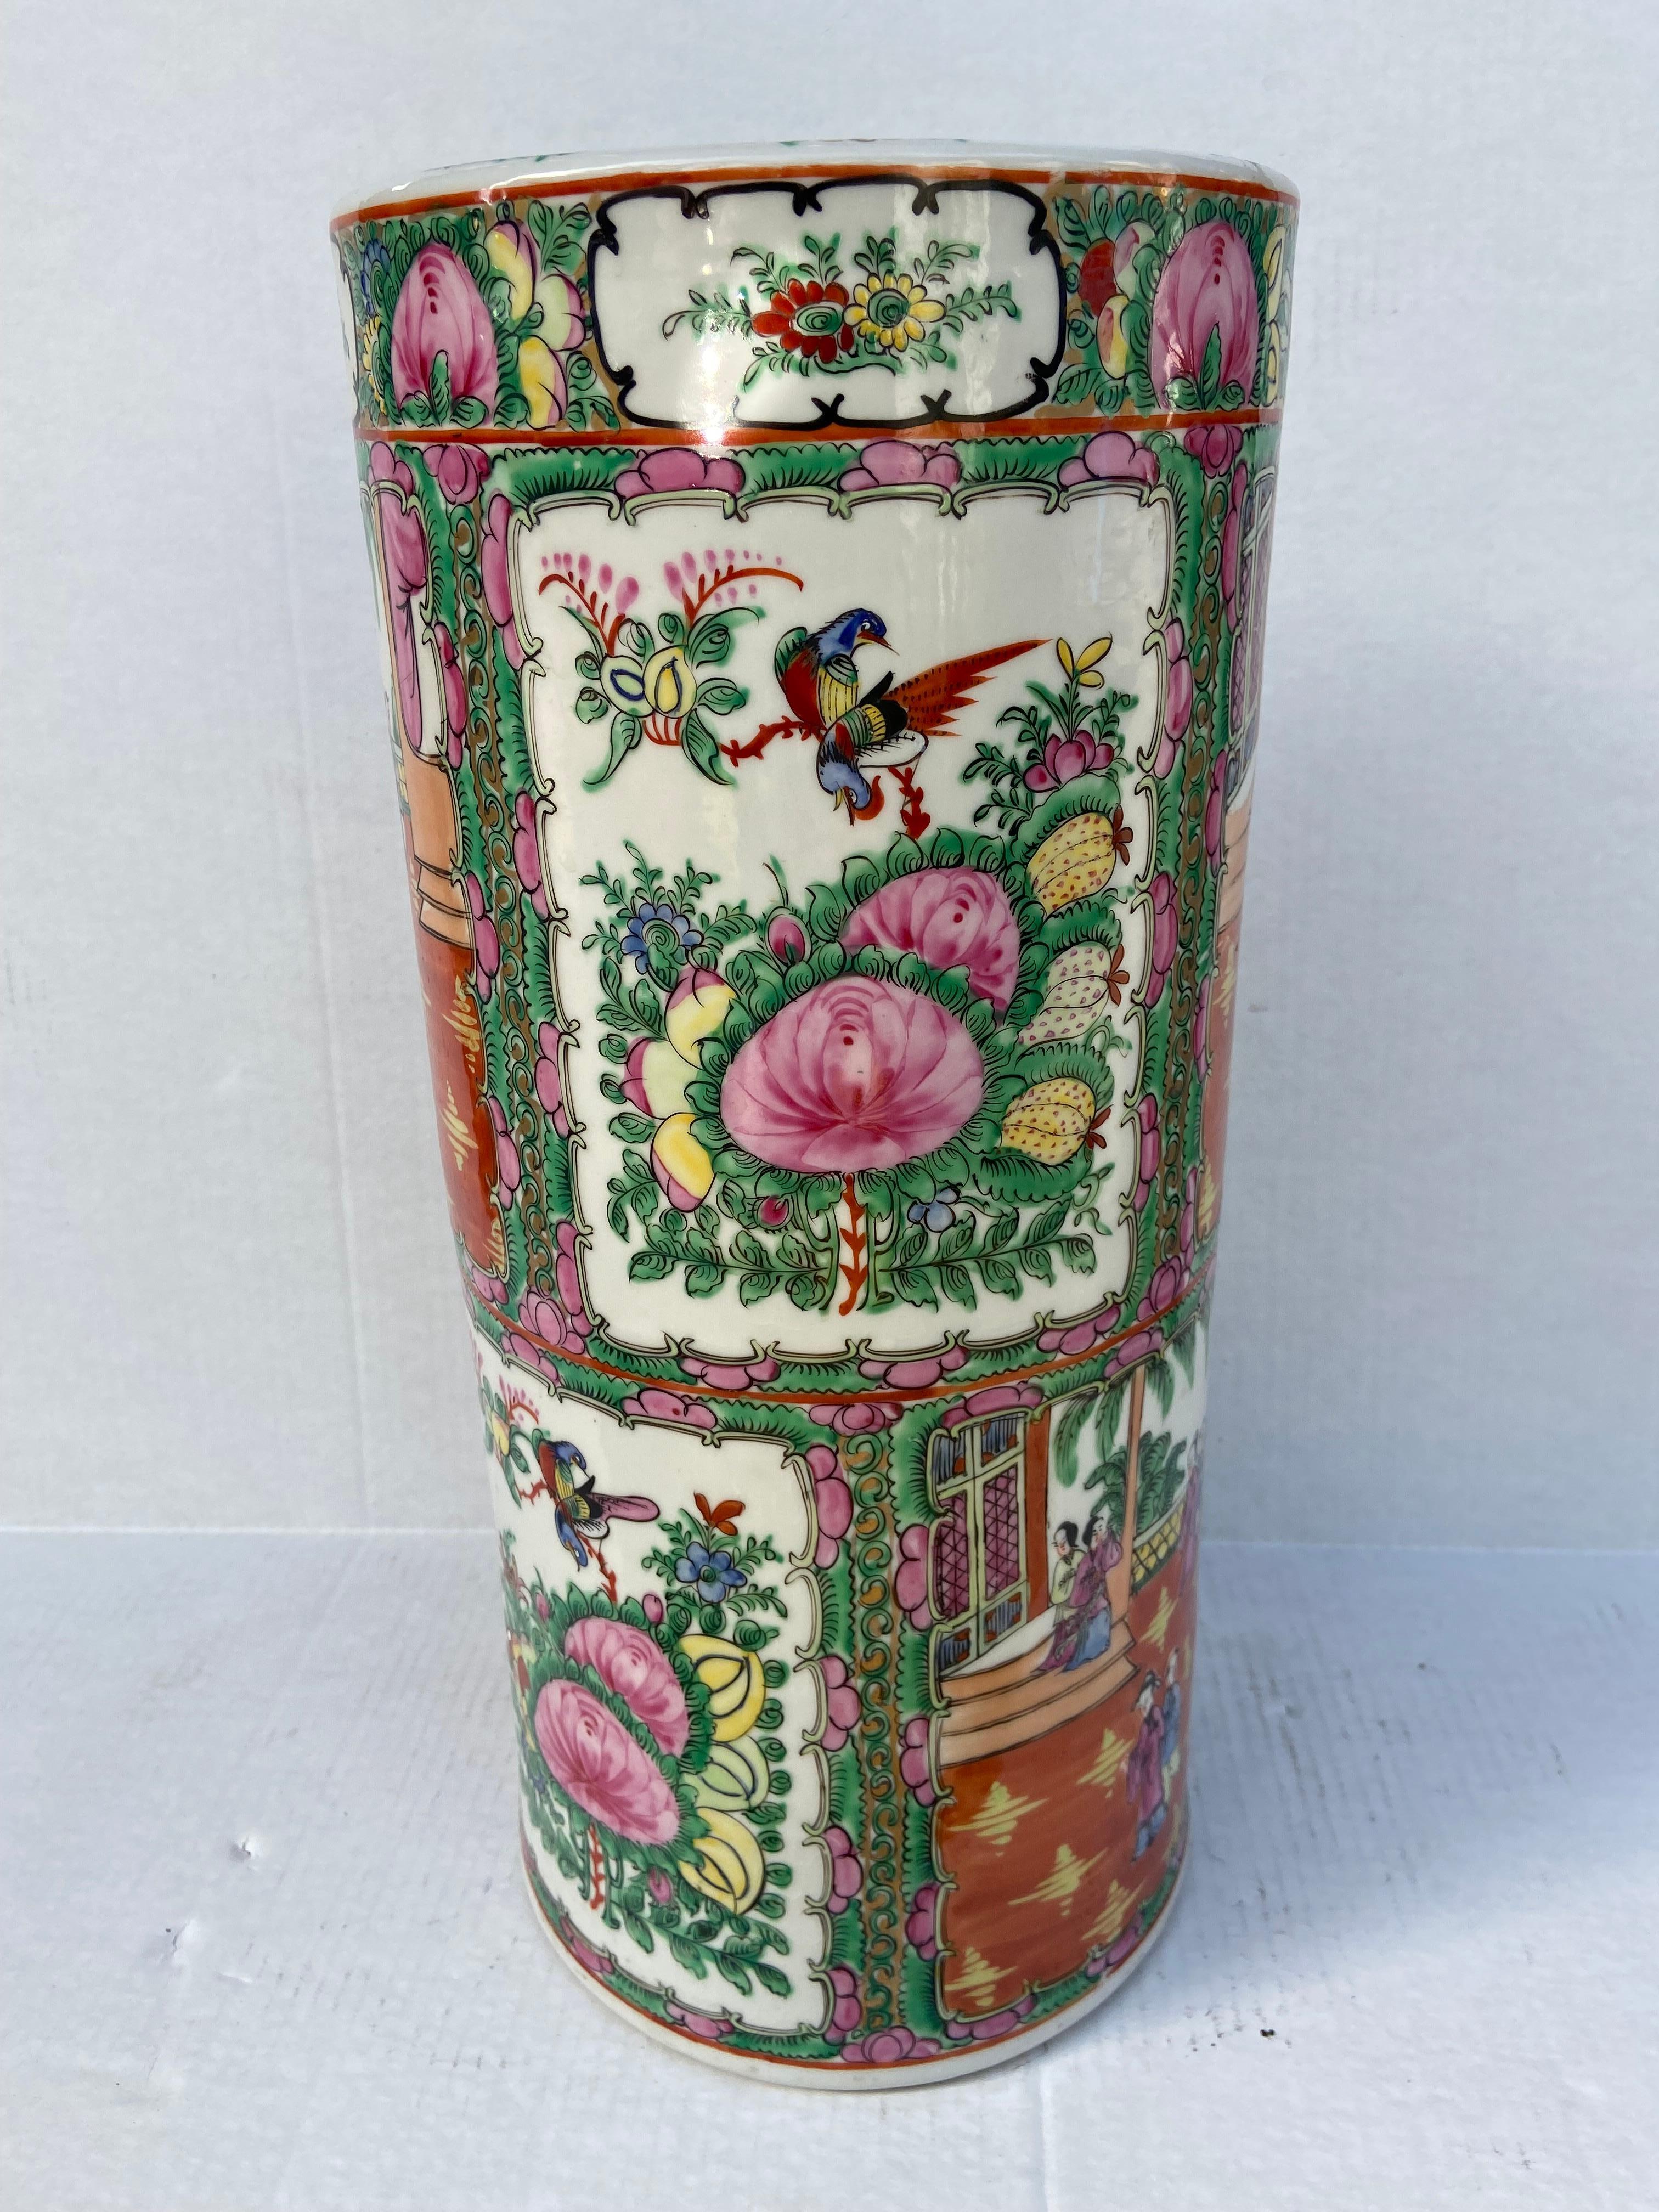 Beautiful Chinese Rose Medallion Umbrella Stand. Hand-painted with a lush and colorful design, this umbrella stand features traditional floral and narrative scenes inspired by historic artworks found in Canton Ware. A handmade porcelain umbrella